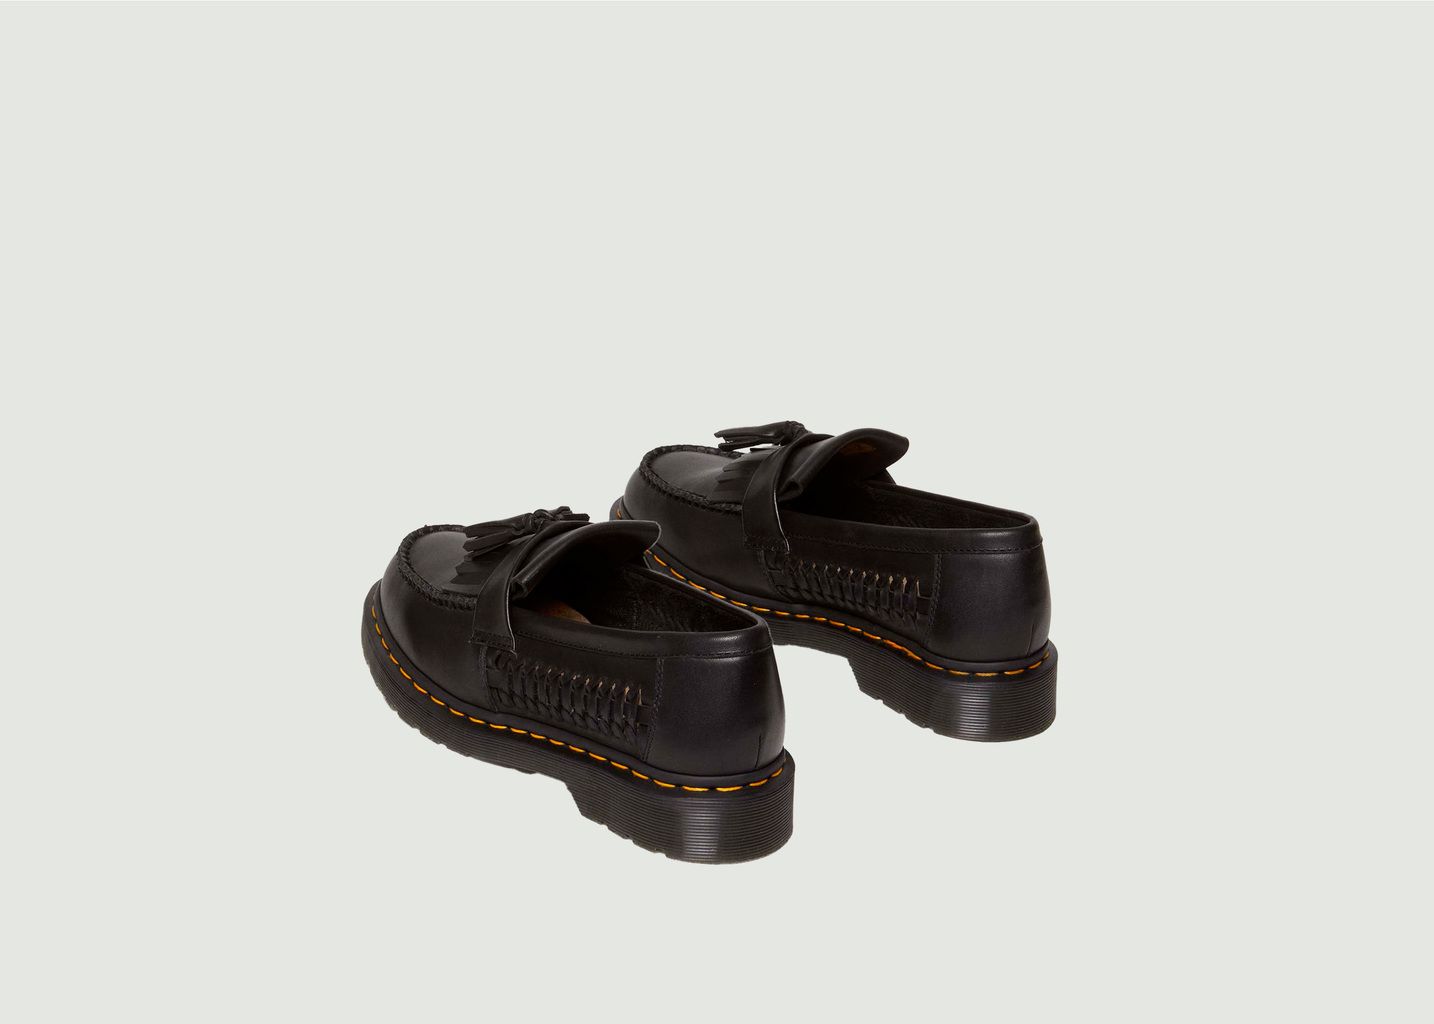 Adrian Woven loafer  - Dr. Martens